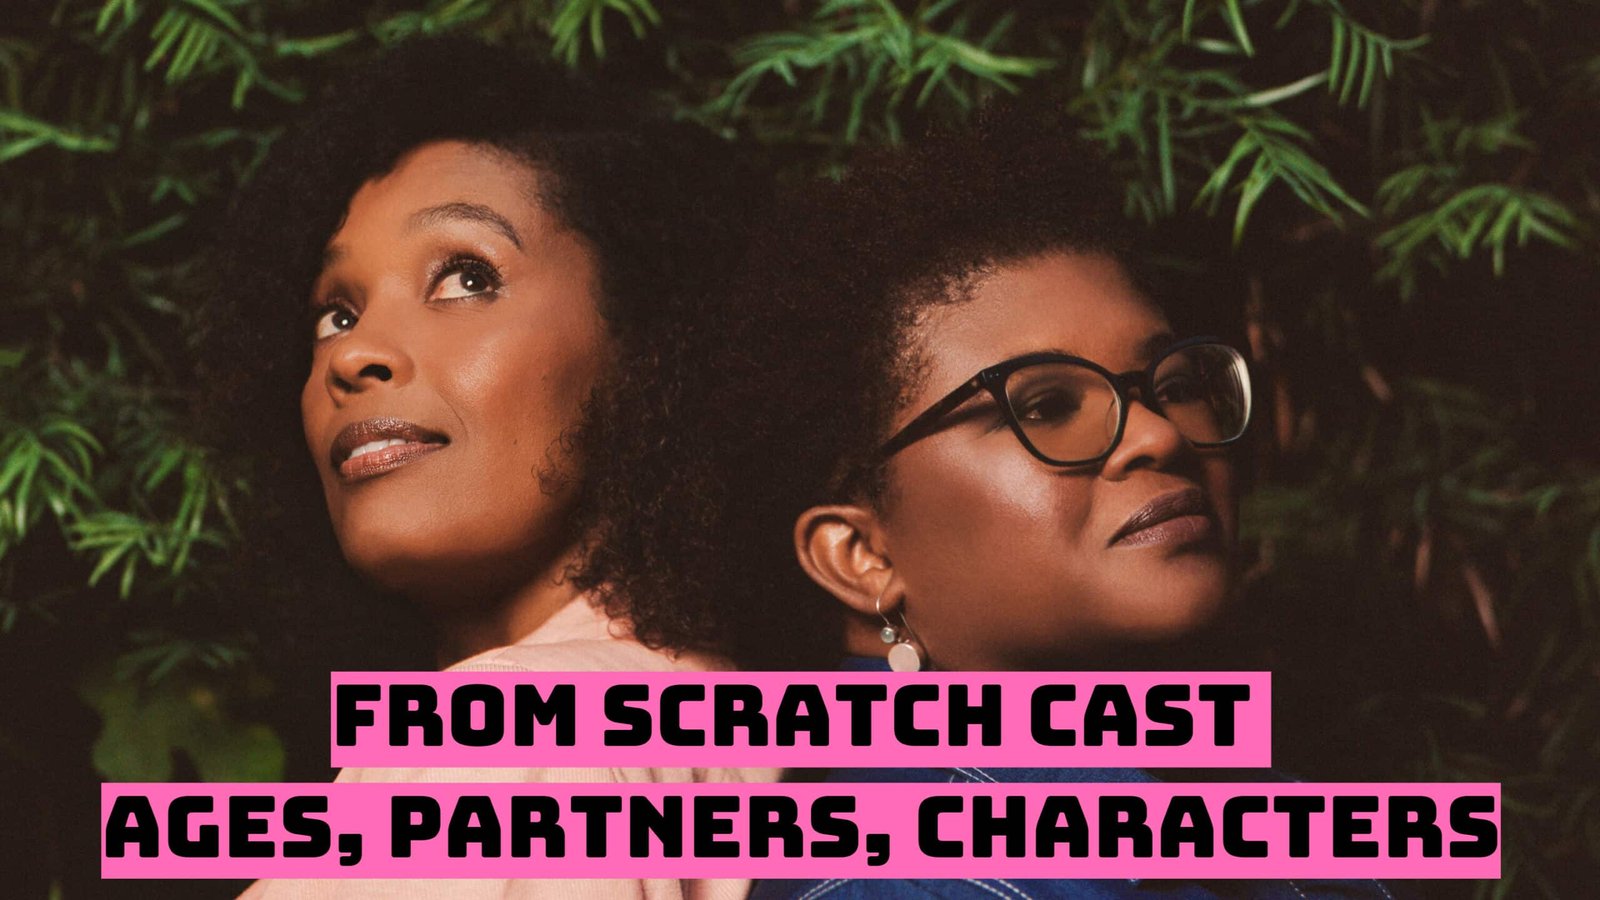 From Scratch Cast - Ages, Partners, Characters